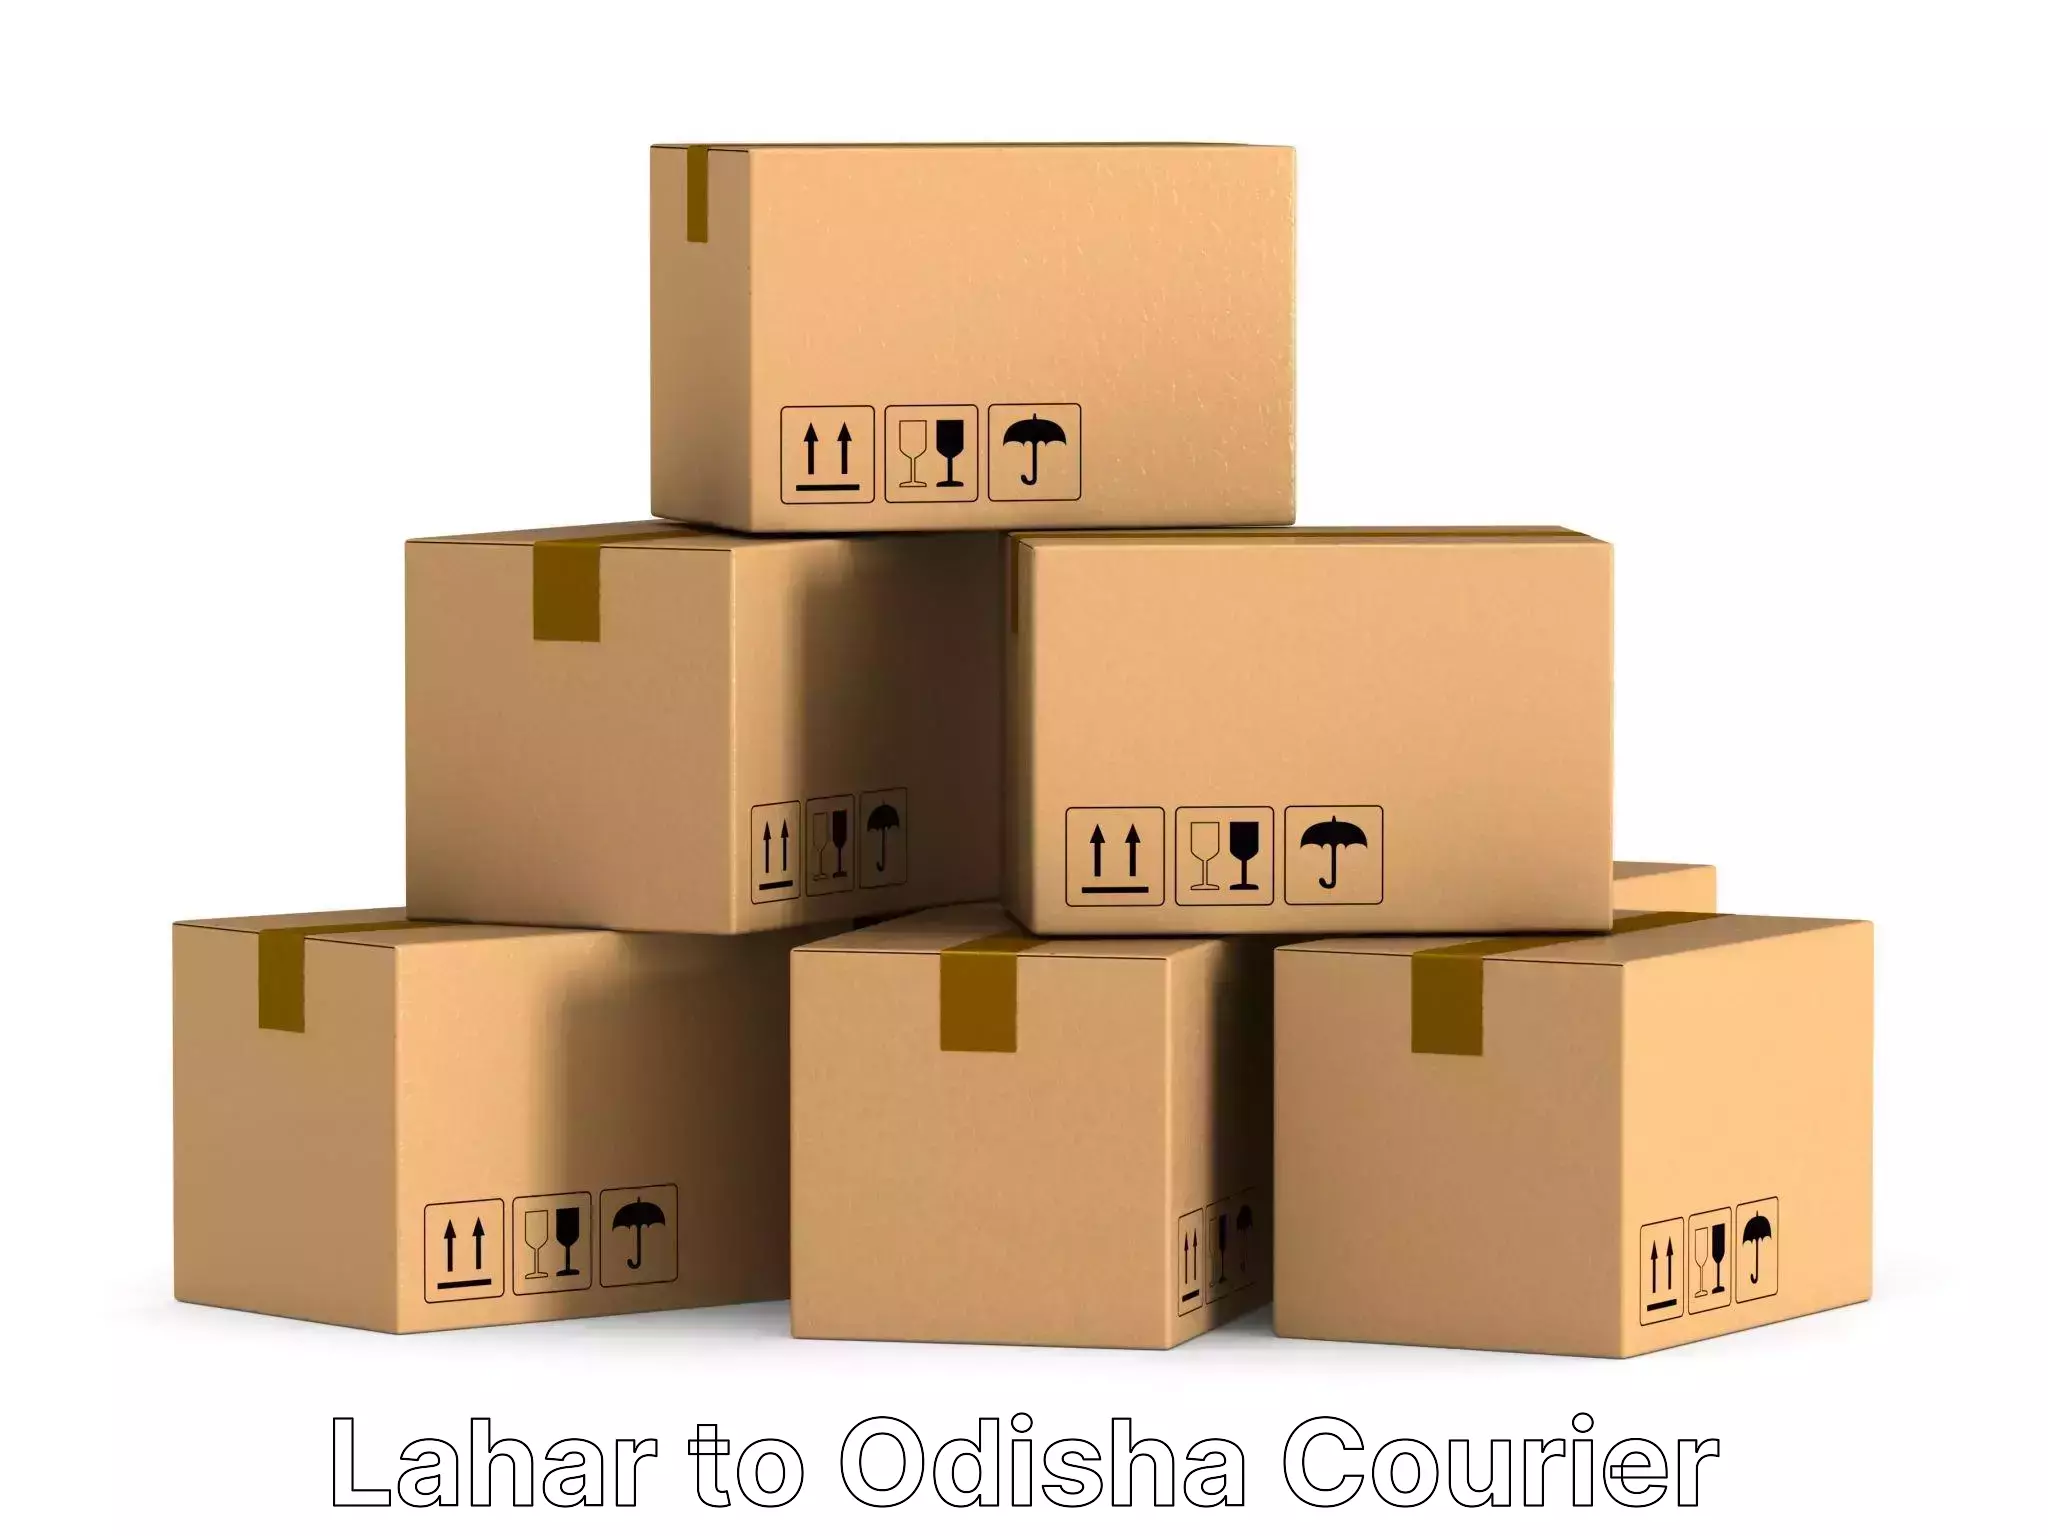 Residential moving experts Lahar to Odisha